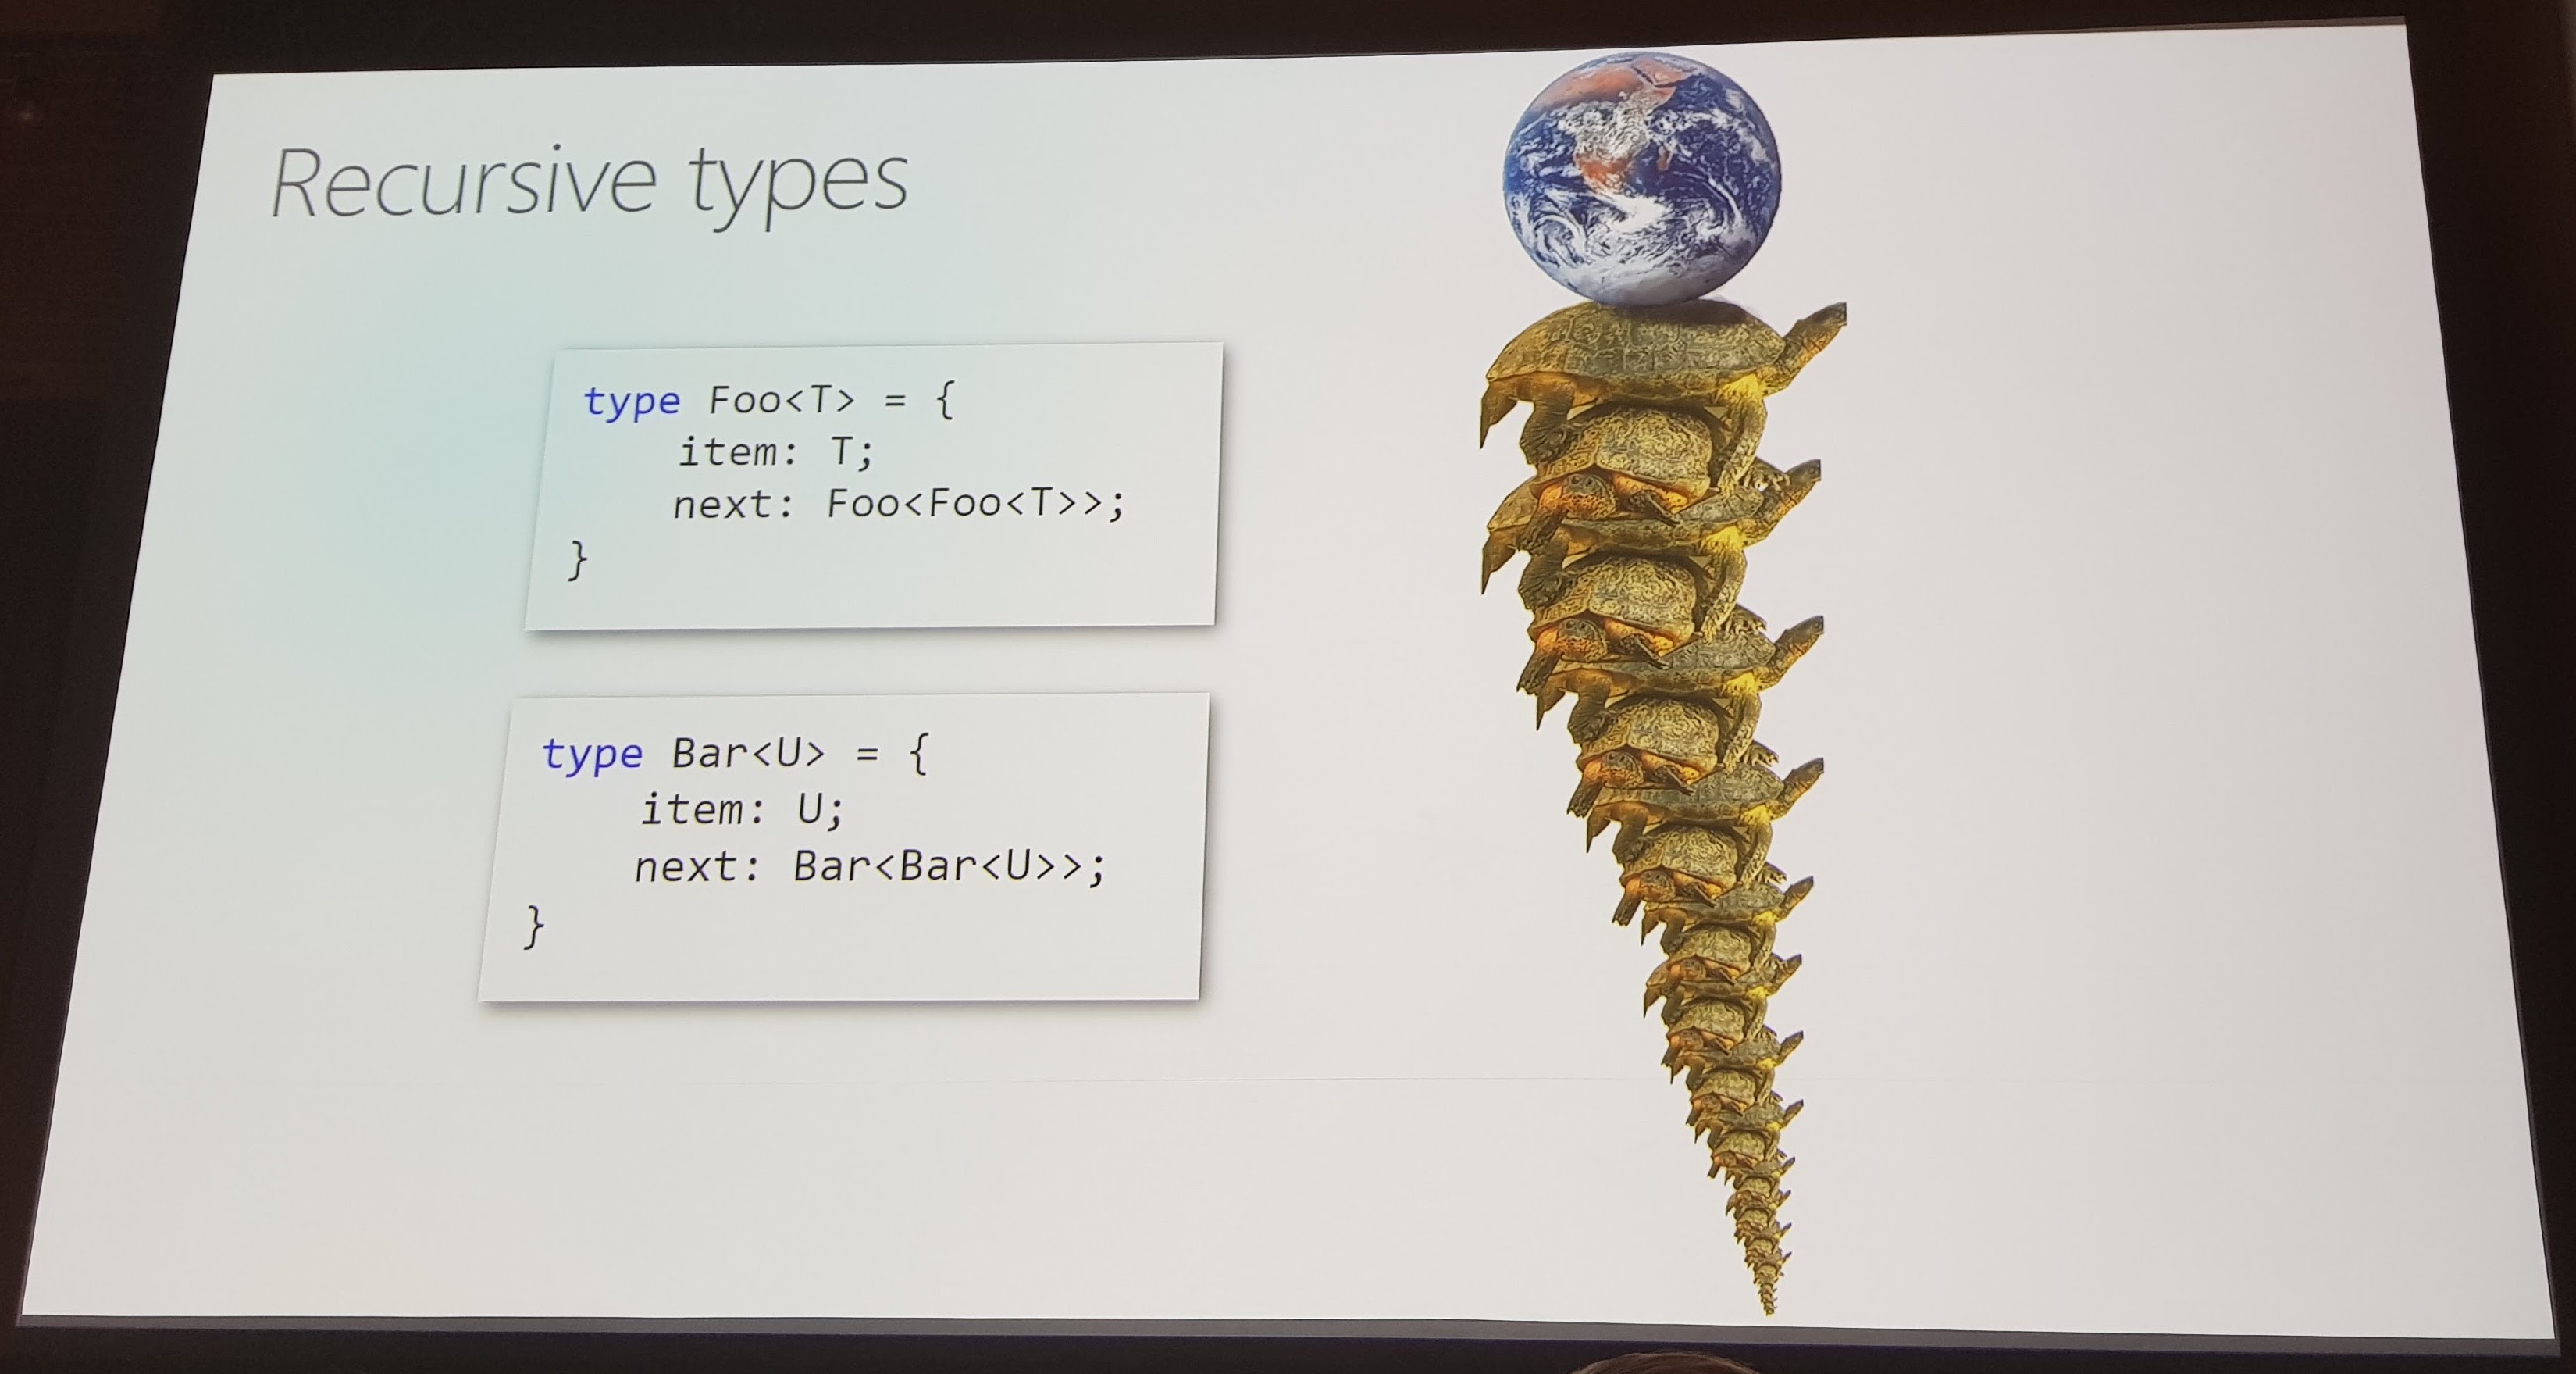 Slide equating recursive types to an infinite stack of turtles supporting the Earth